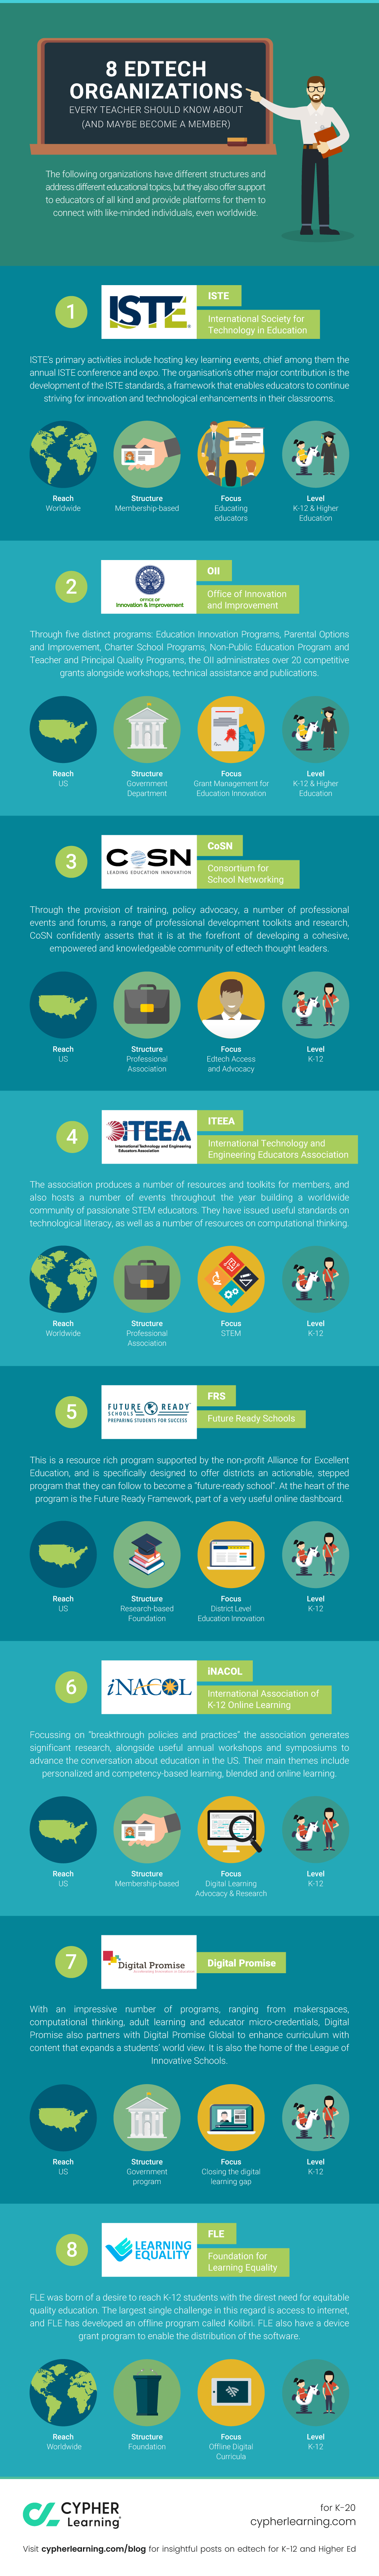 8 Edtech organizations every teacher should know about